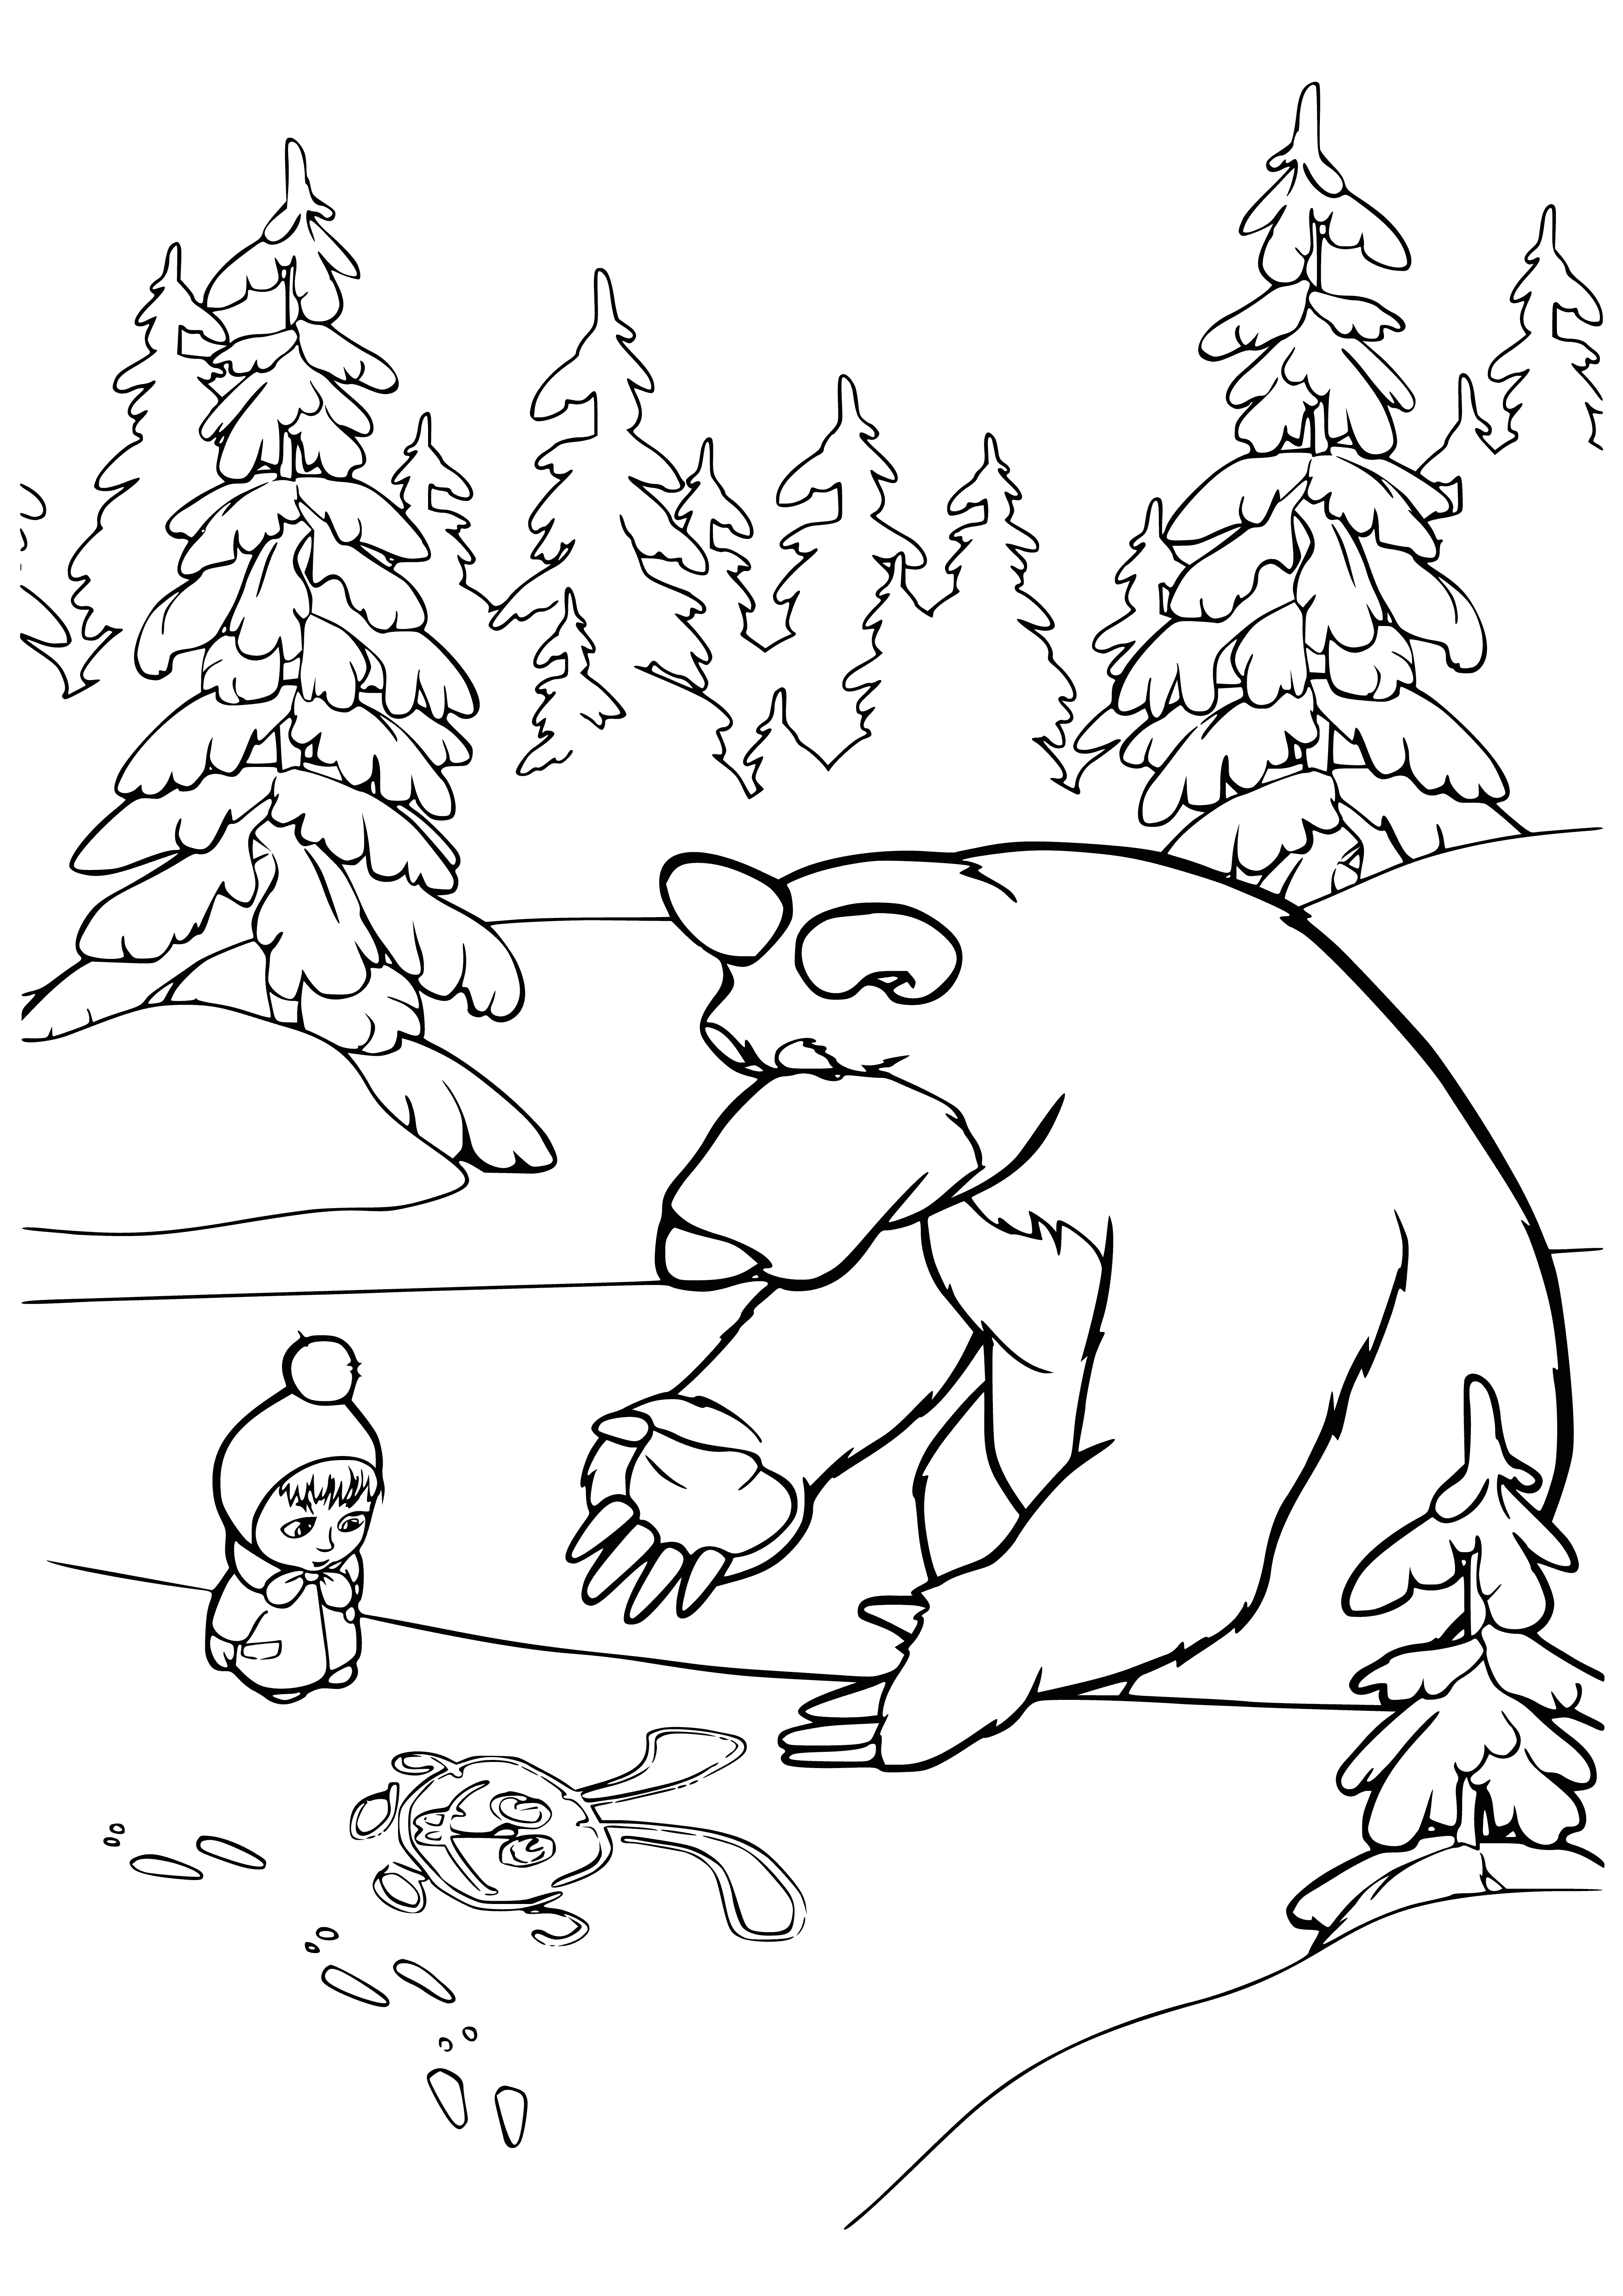 coloring page: Masha, a blonde girl in a red dress and scarf, stands before a brown bear with a carrot in its paws. In her basket is a white bunny.